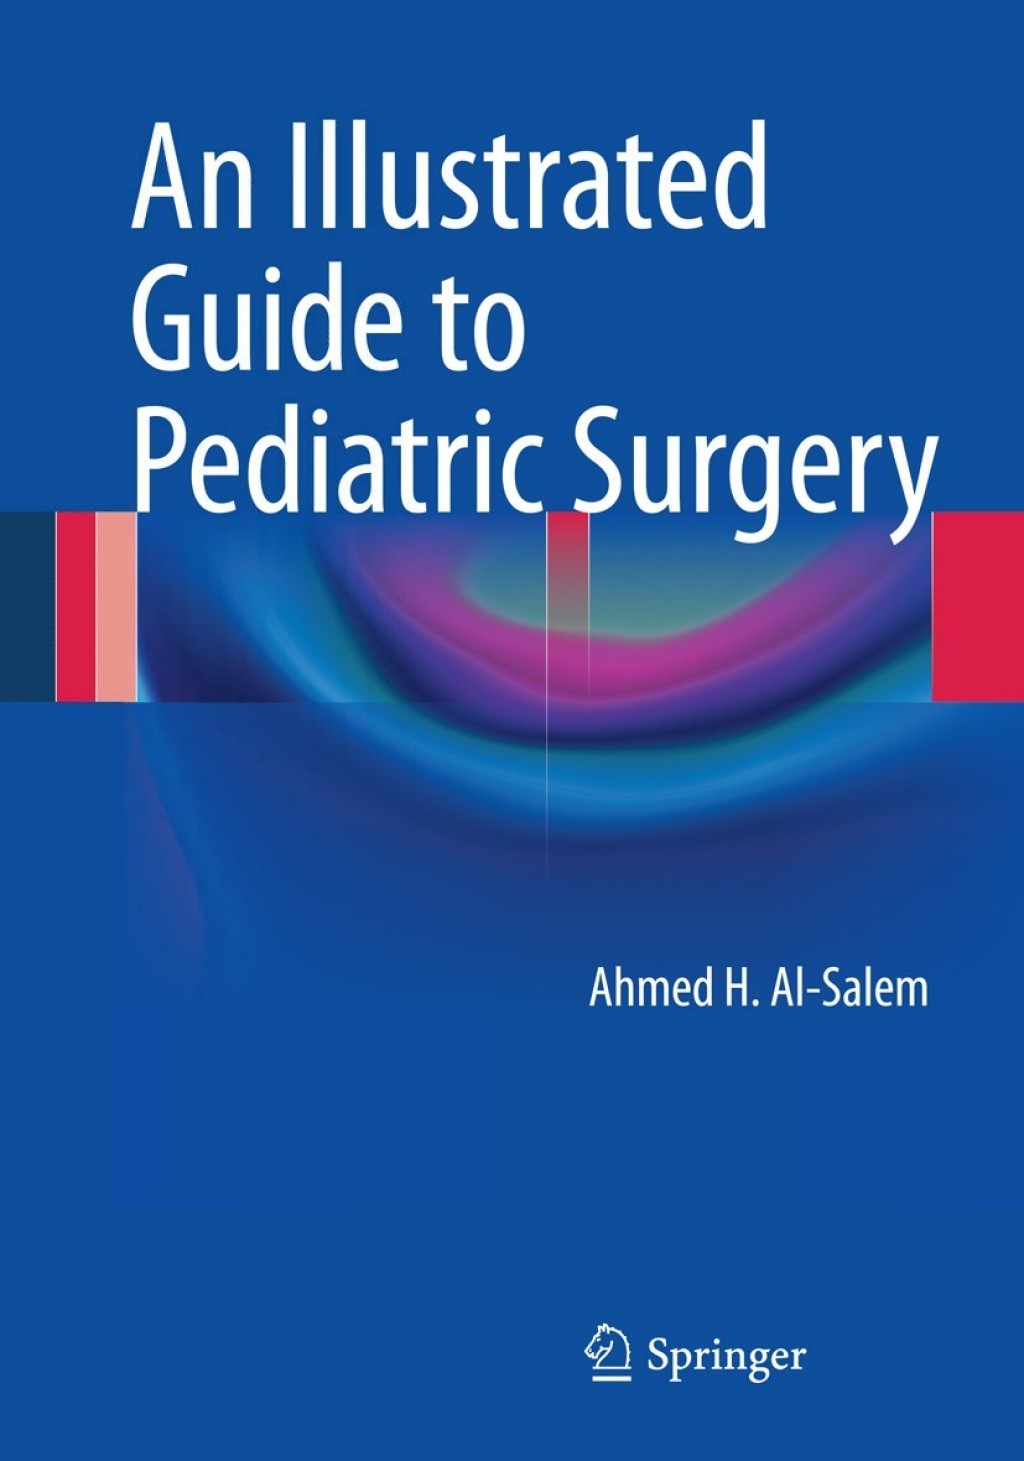 An Illustrated Guide to Pediatric Surgery (eBook Rental) - Ahmed H. Al-Salem,